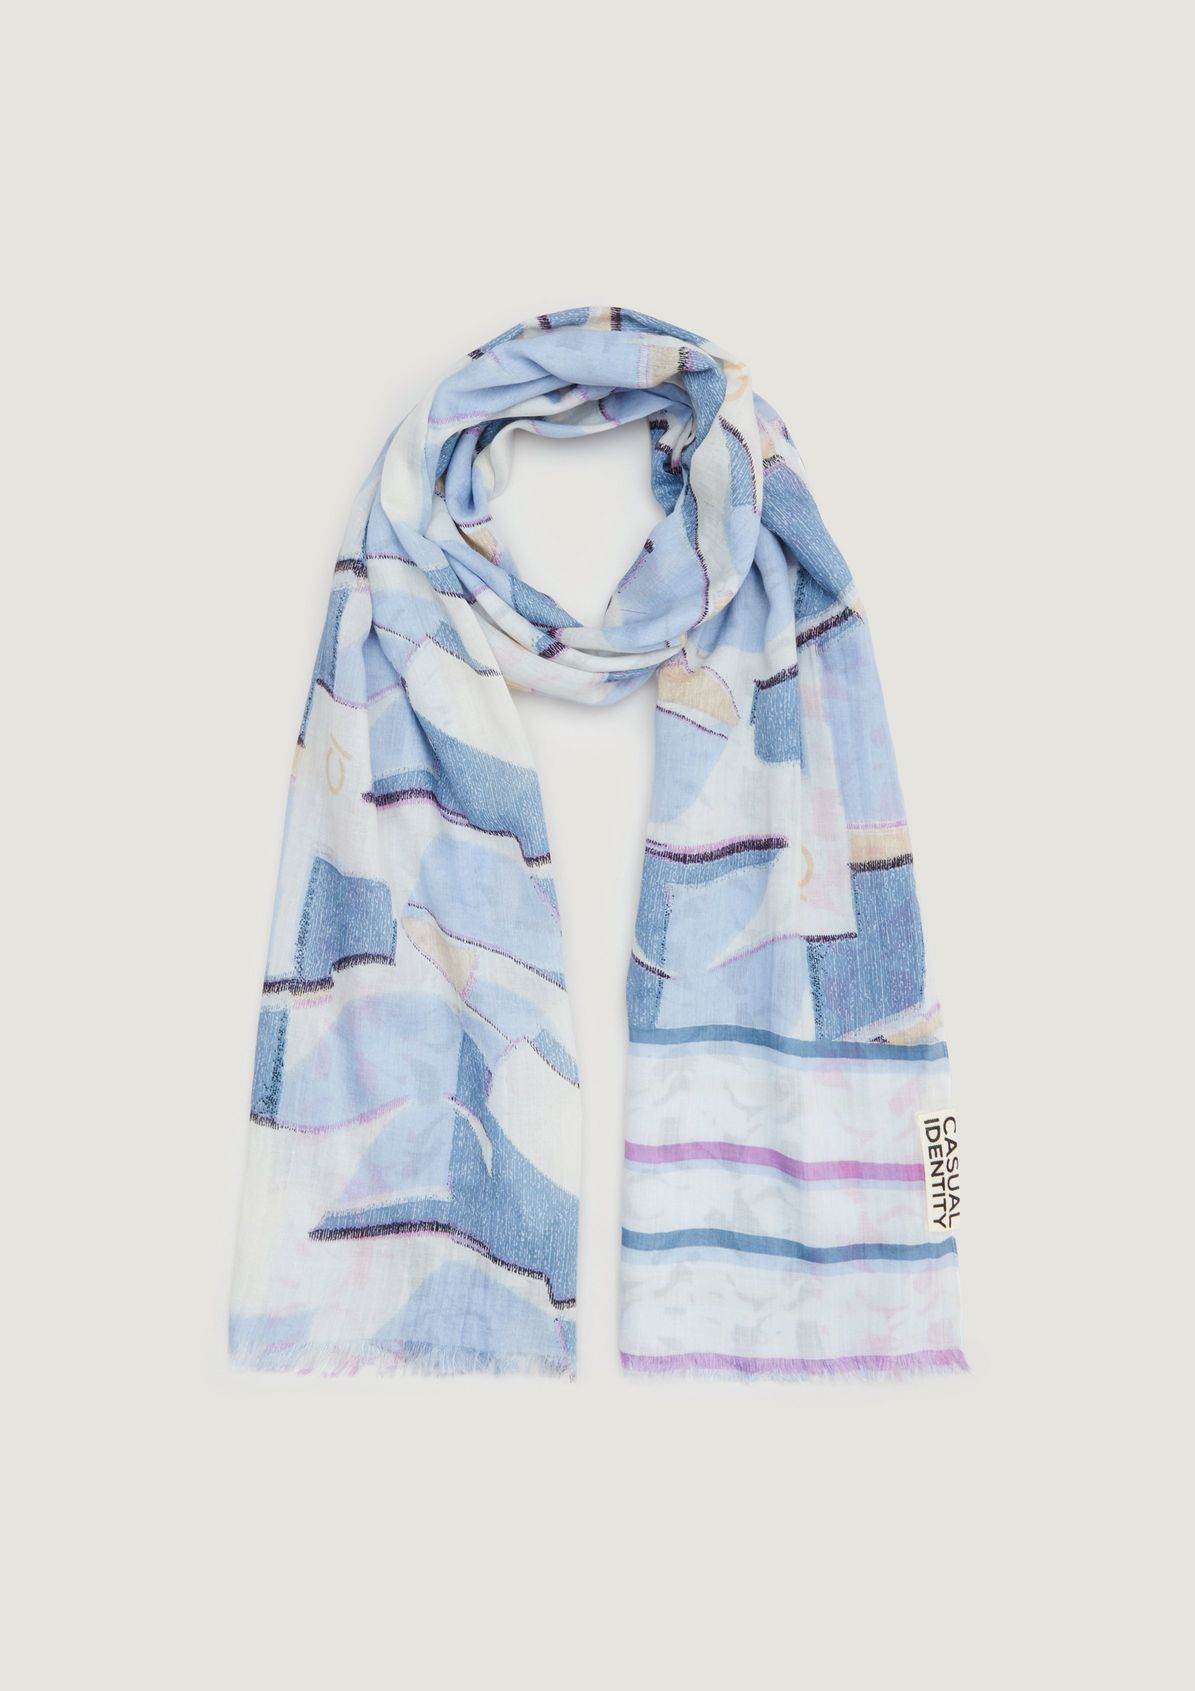 Scarf from comma